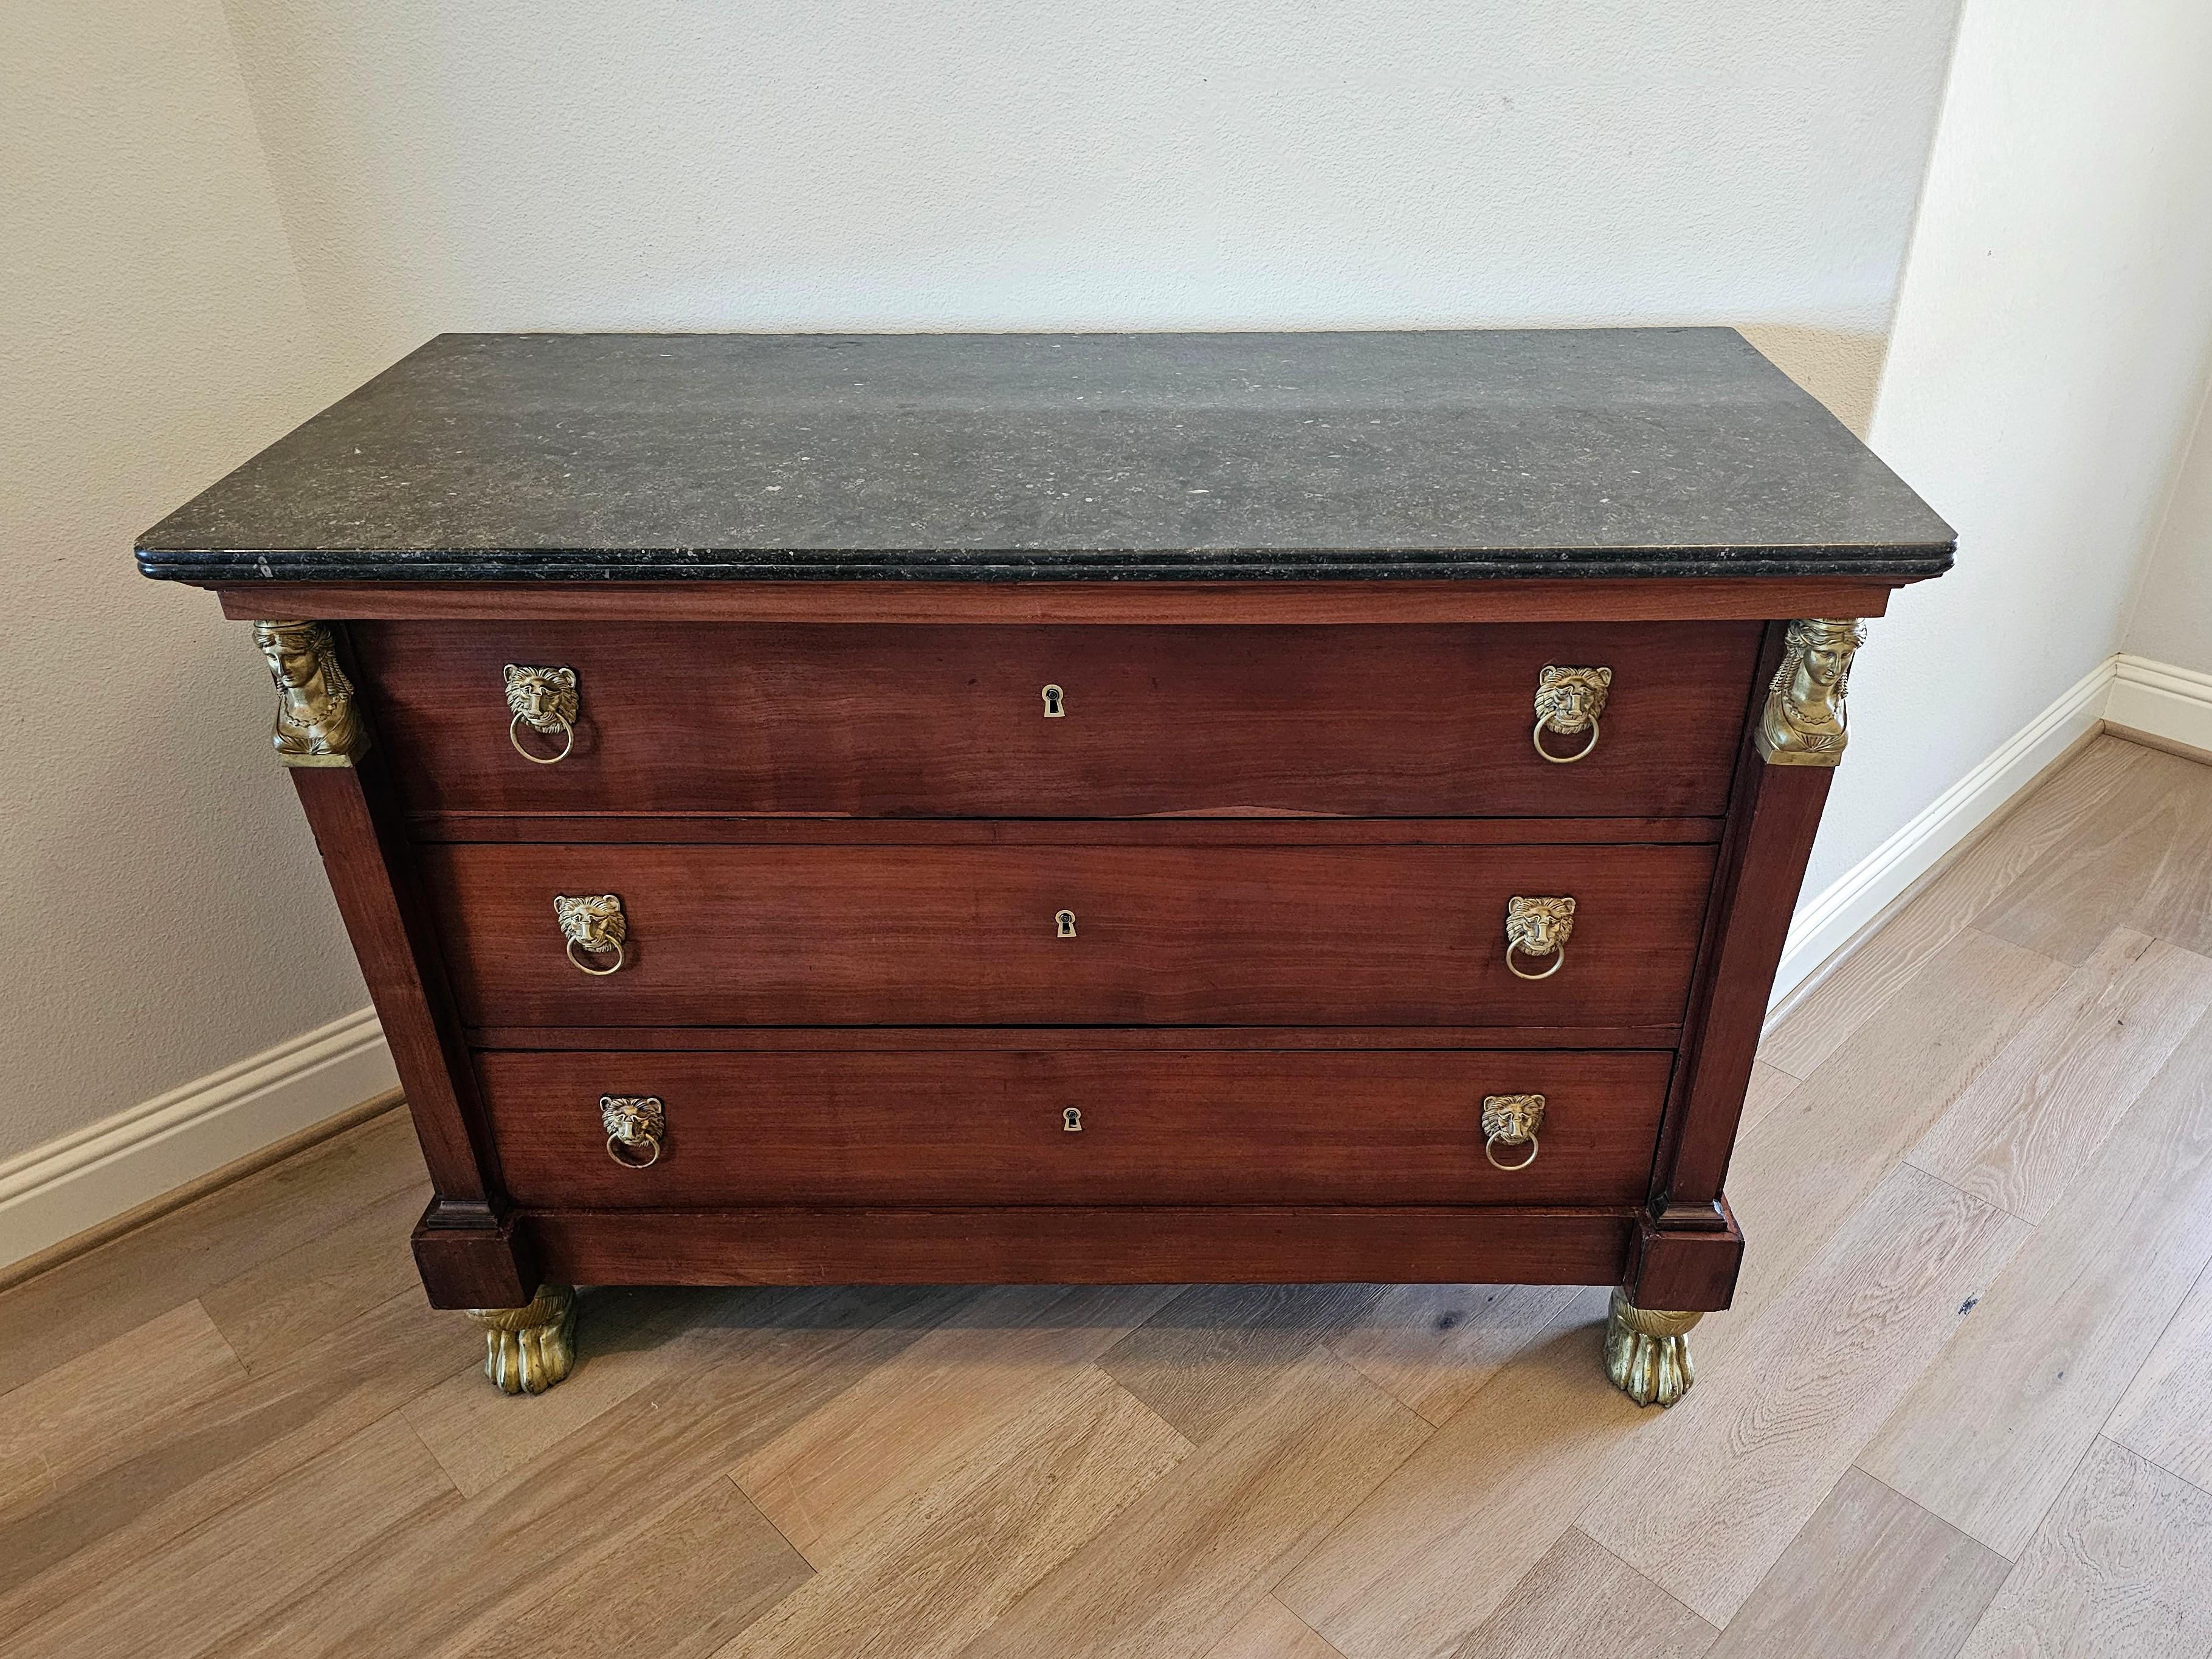 19th Century 19th C. French Restoration Period Empire Style Mahogany Chest Of Drawers Commode For Sale